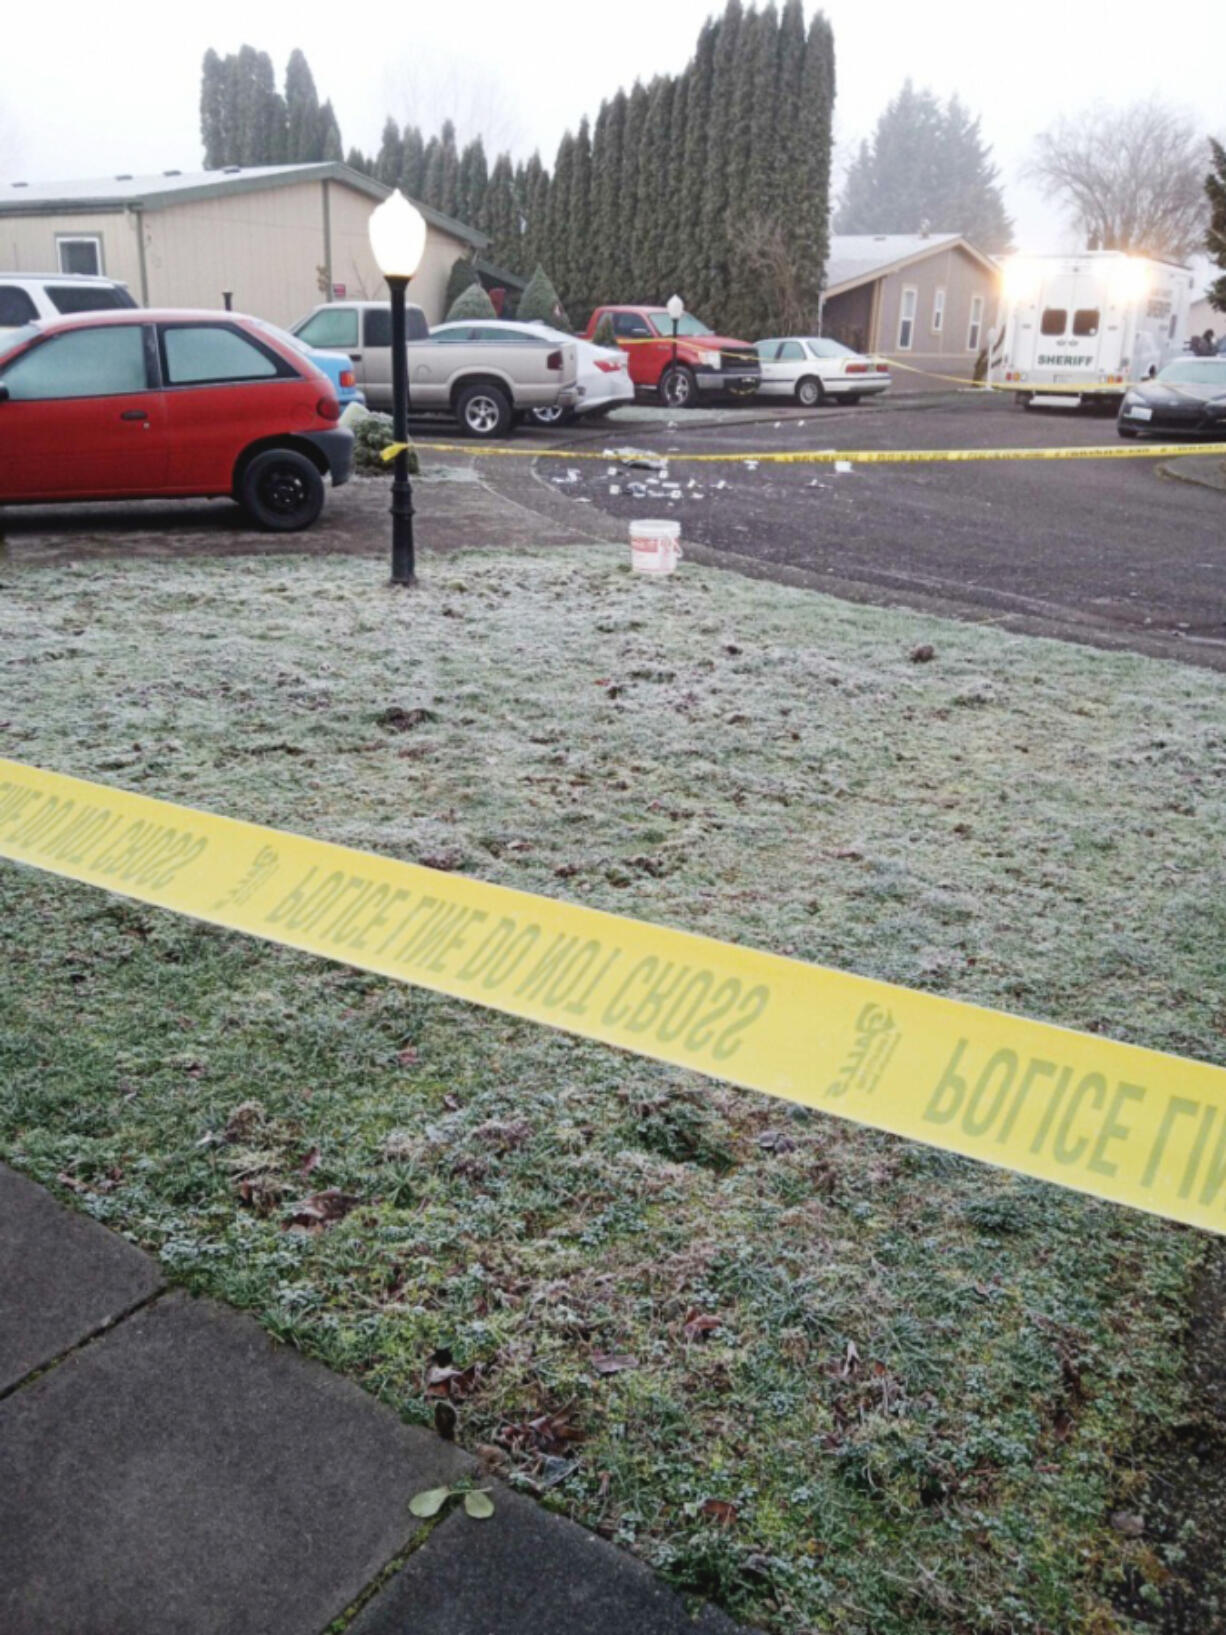 Police tape blocks off the area where Vancouver police officers fatally shot a man they say was armed with a knife Jan. 9. The shooting was at the Sky Ridge Estates mobile home park in Vancouver's North Image neighborhood.